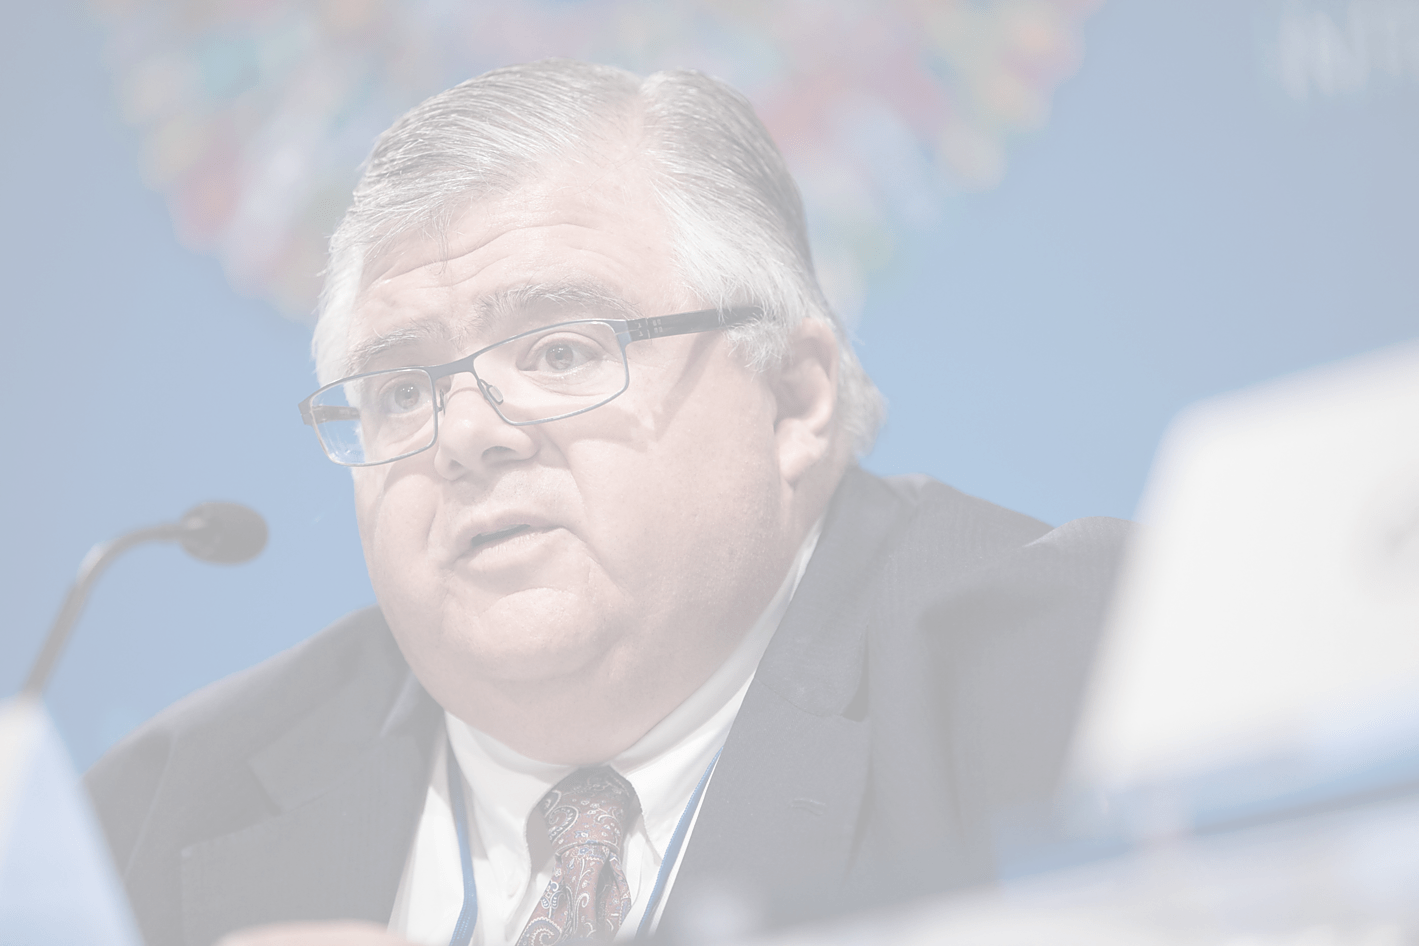 Chairman of the IMFC and Bank of Mexico Governor Agustin Carstens speaks during an IMFC press conference.